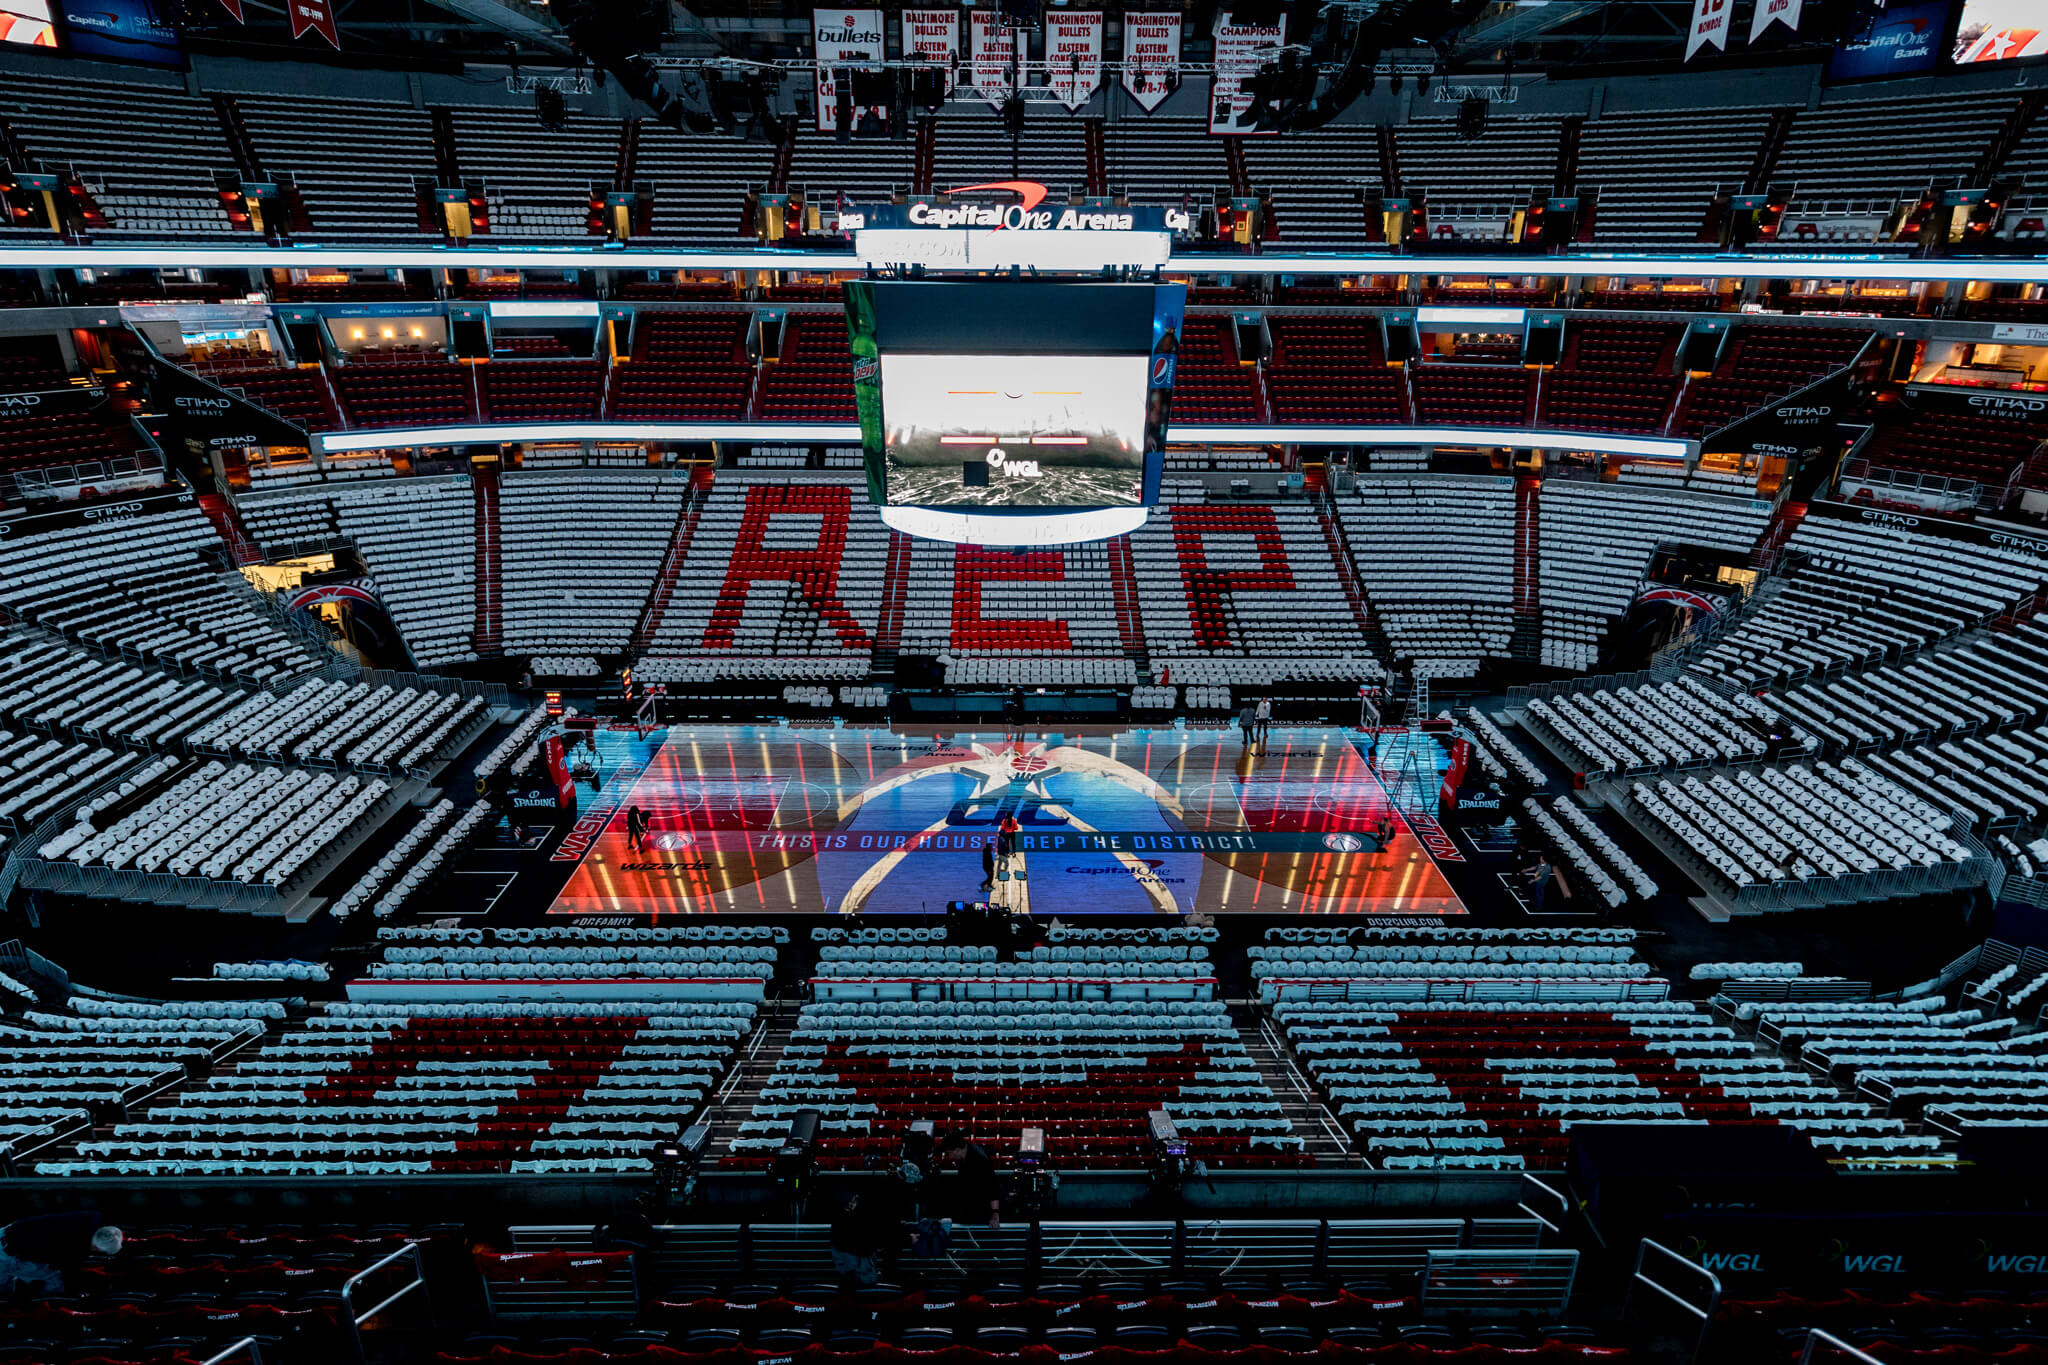 About Capital One Arena